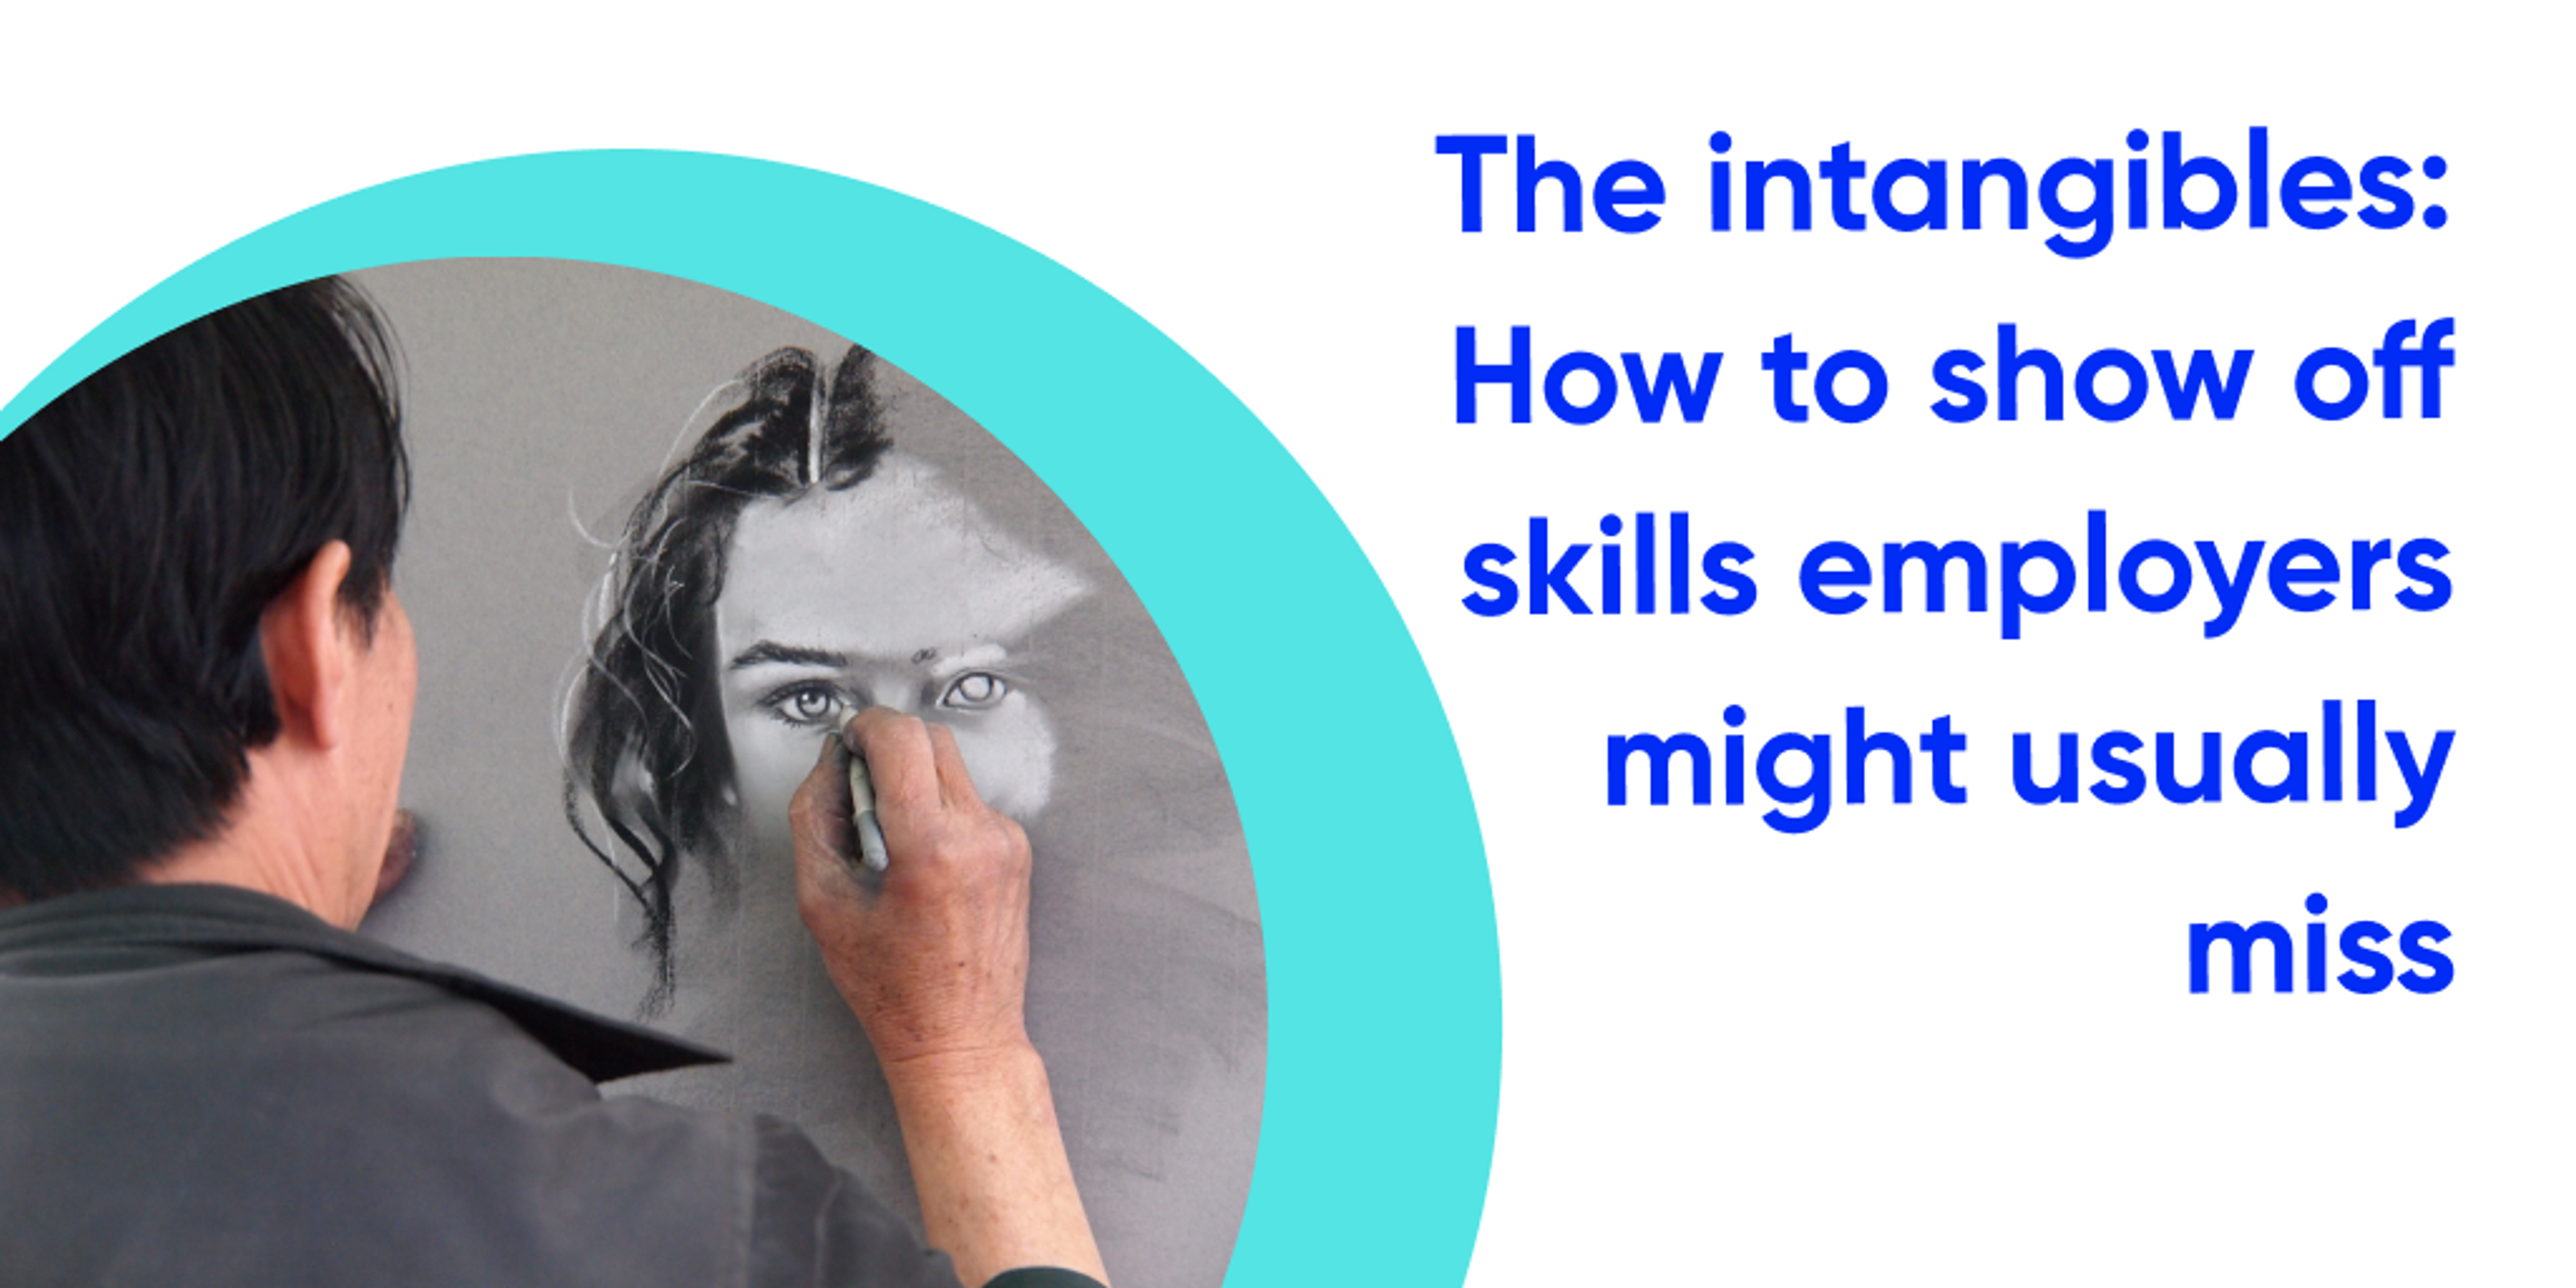 white background with blue text with the image of a person drawing a womans face in charcoal with the heading "The Intangibles: How to Show off Skills Employers Might Usually Miss"